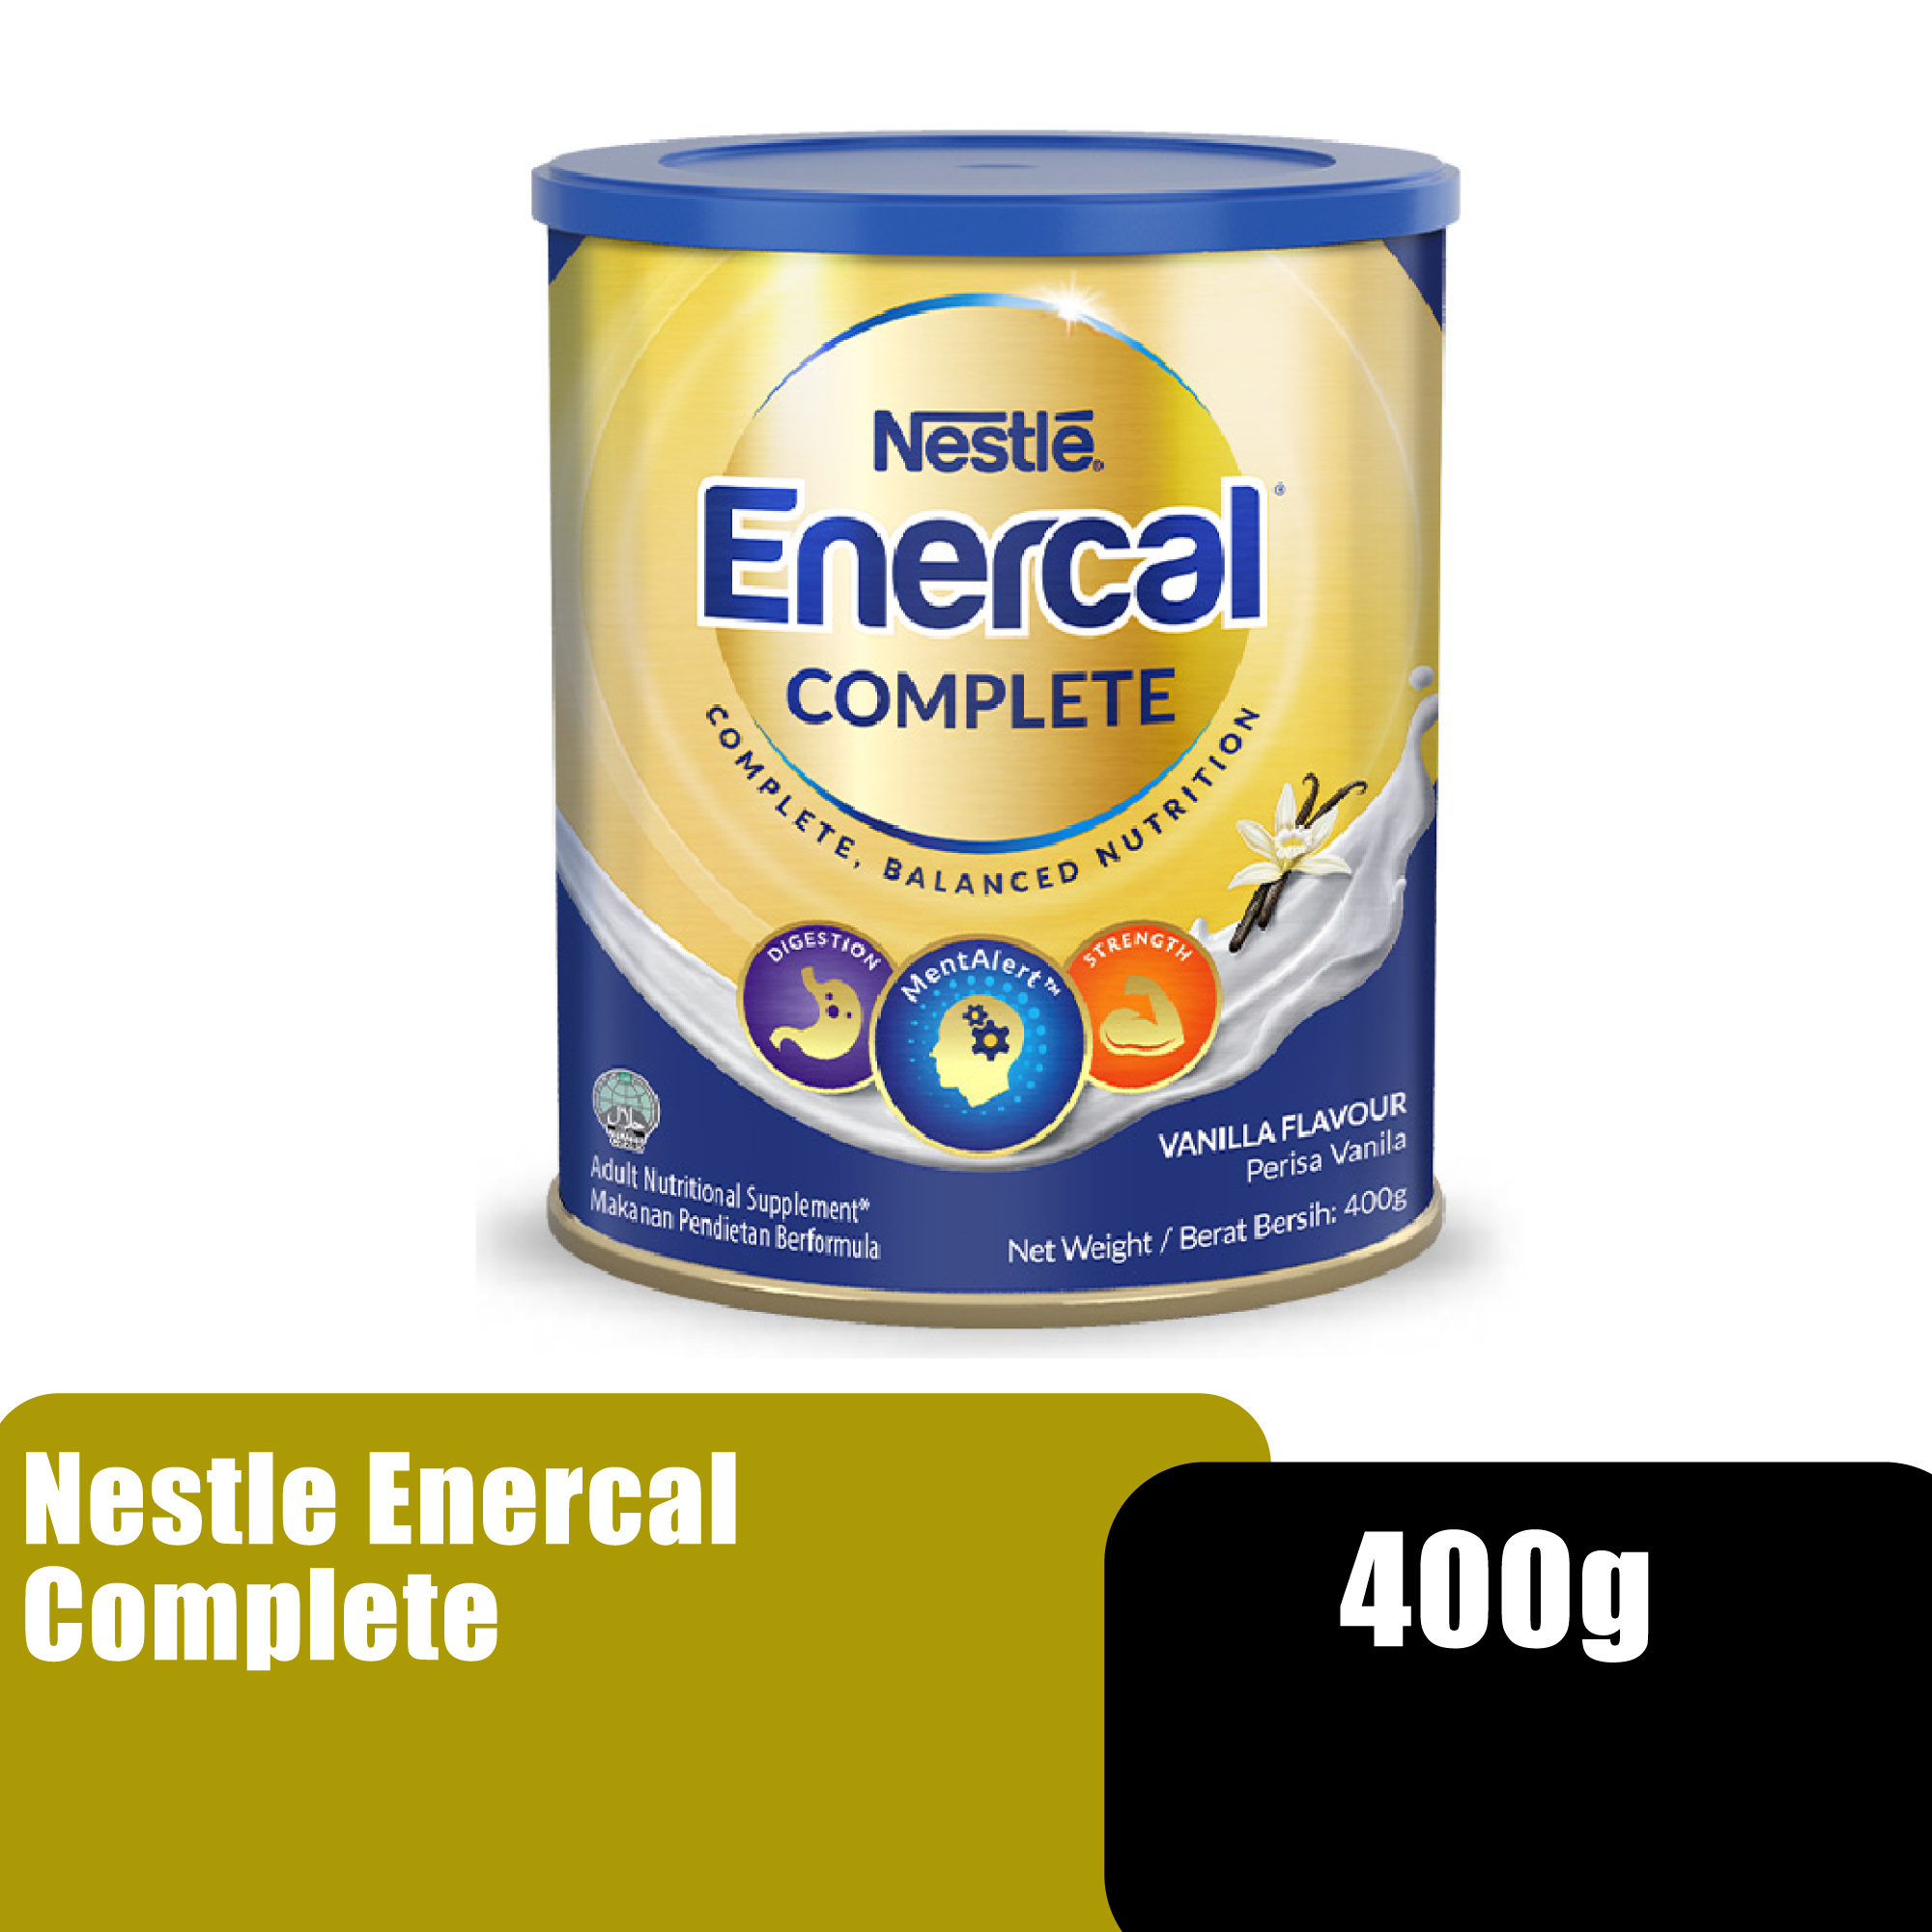 Nestle Enercal Nutrient Complete contain with Calcium & Protein 400g - Vanilla Flavour